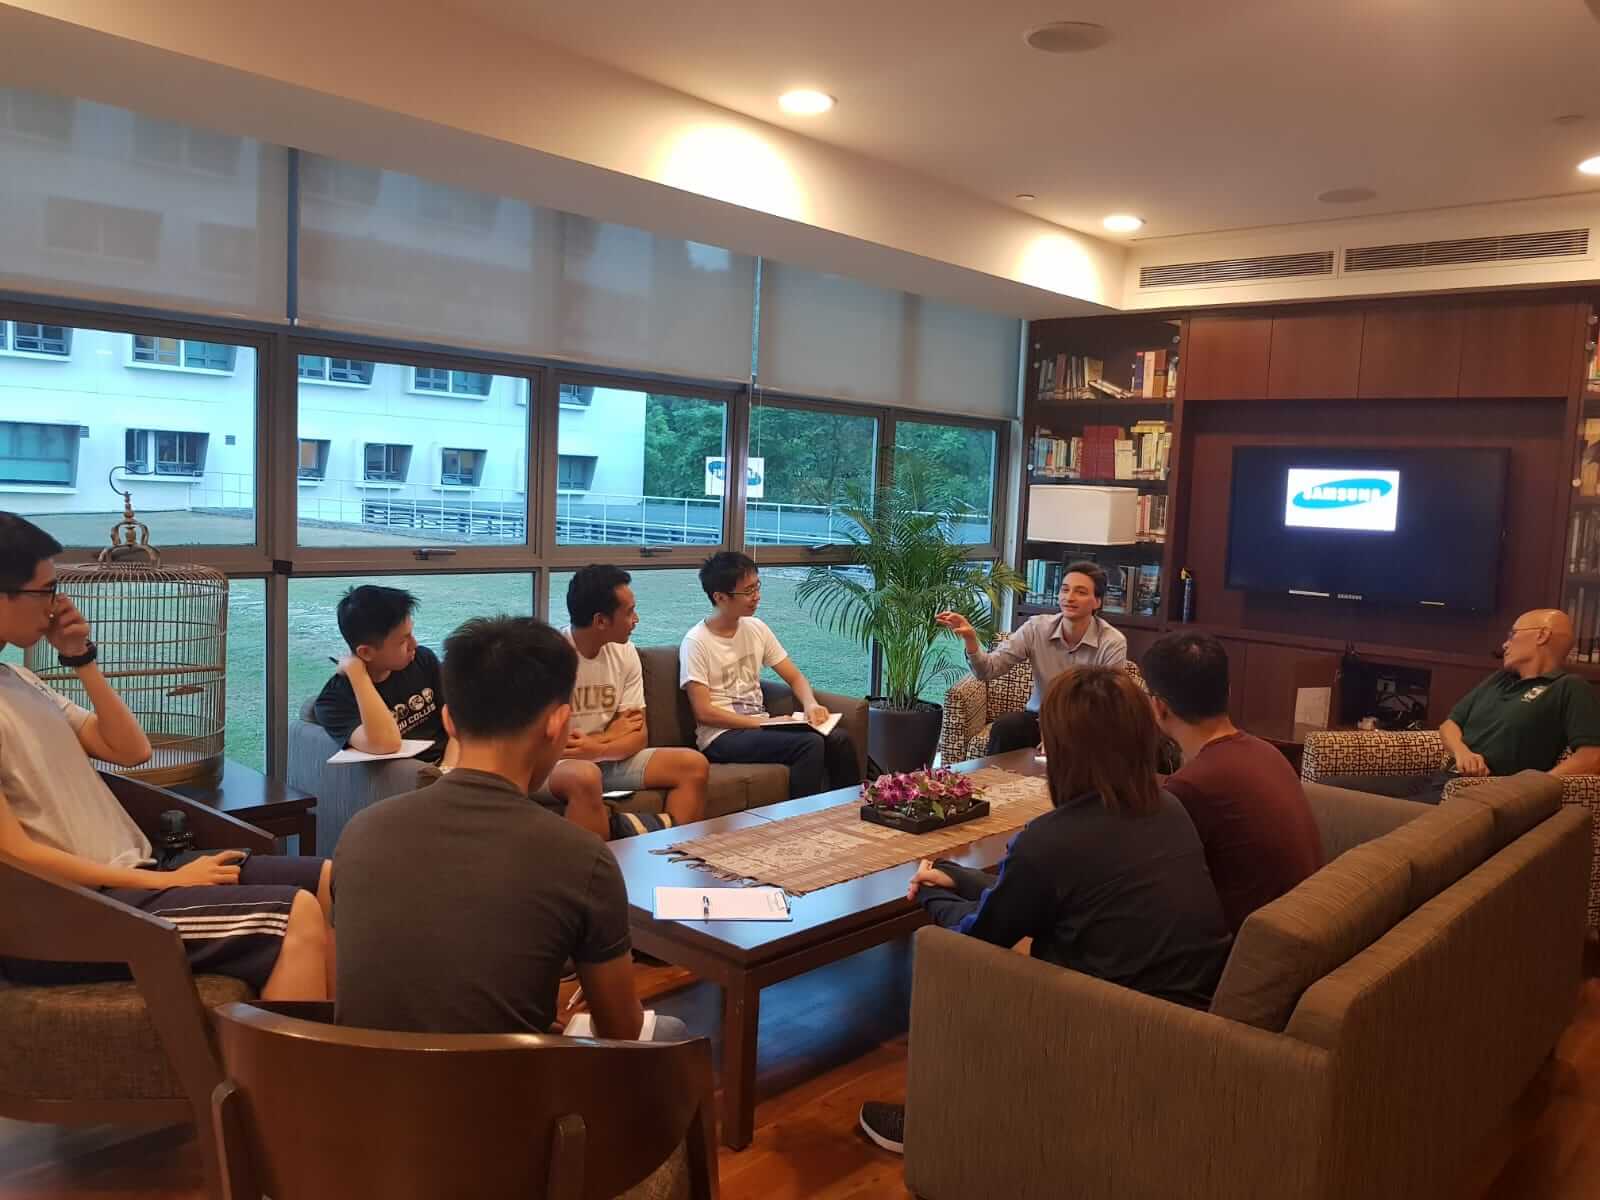 The ambience at the Master's Common Lounge provided for stimulating discussion. Kevin (centre right) with Prof Tay (right)